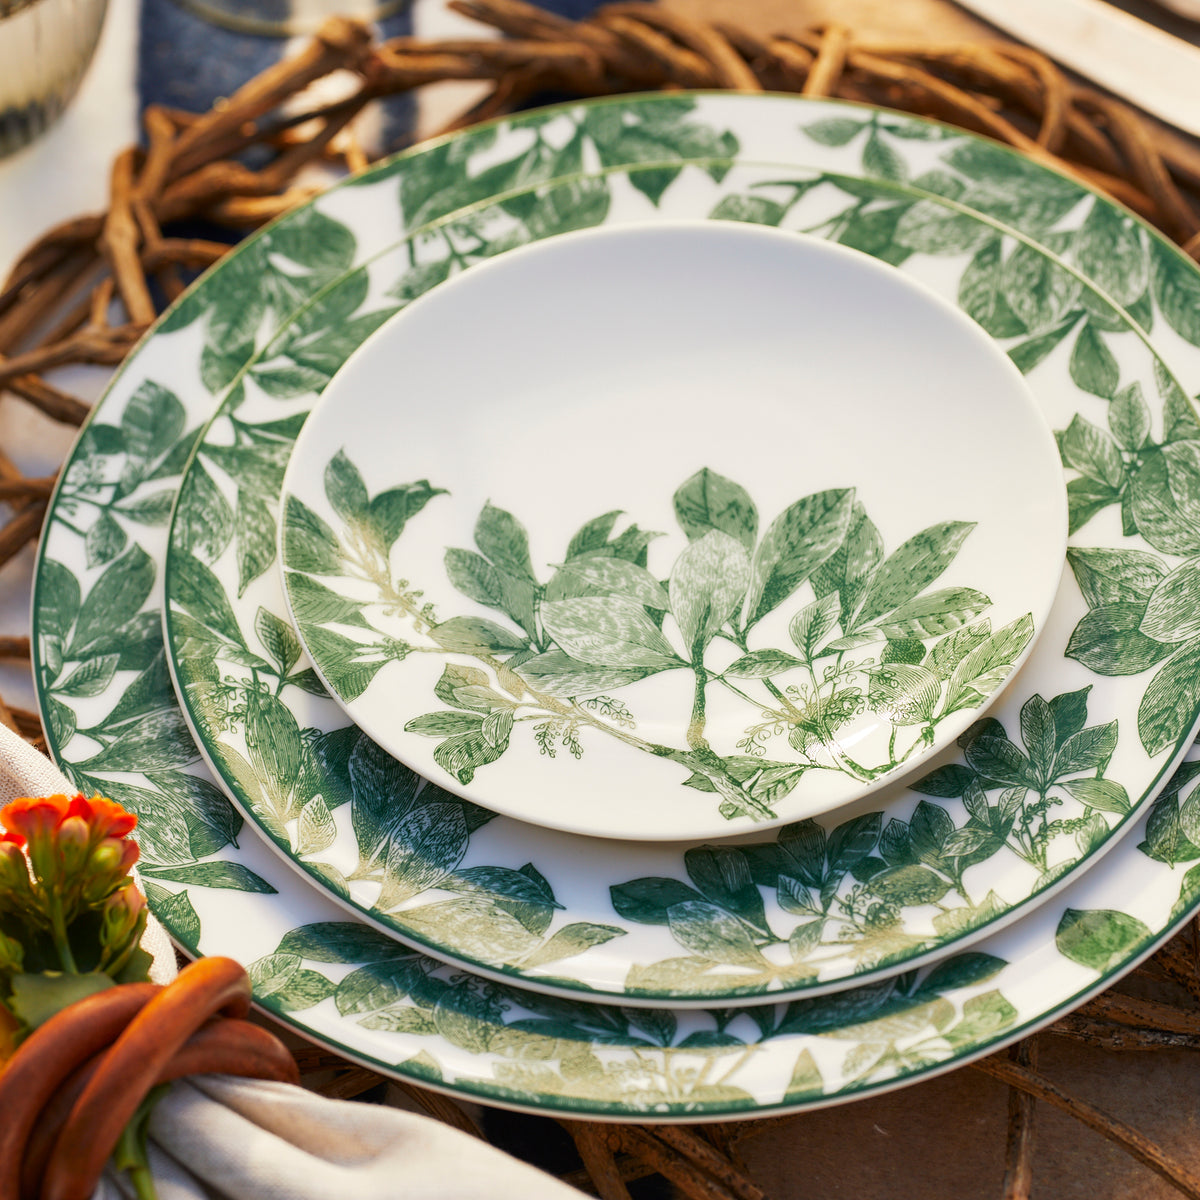 A stack of Arbor Green Canapé Plates from the Caskata collection with green leaf patterns on a woven placemat, dishwasher safe.